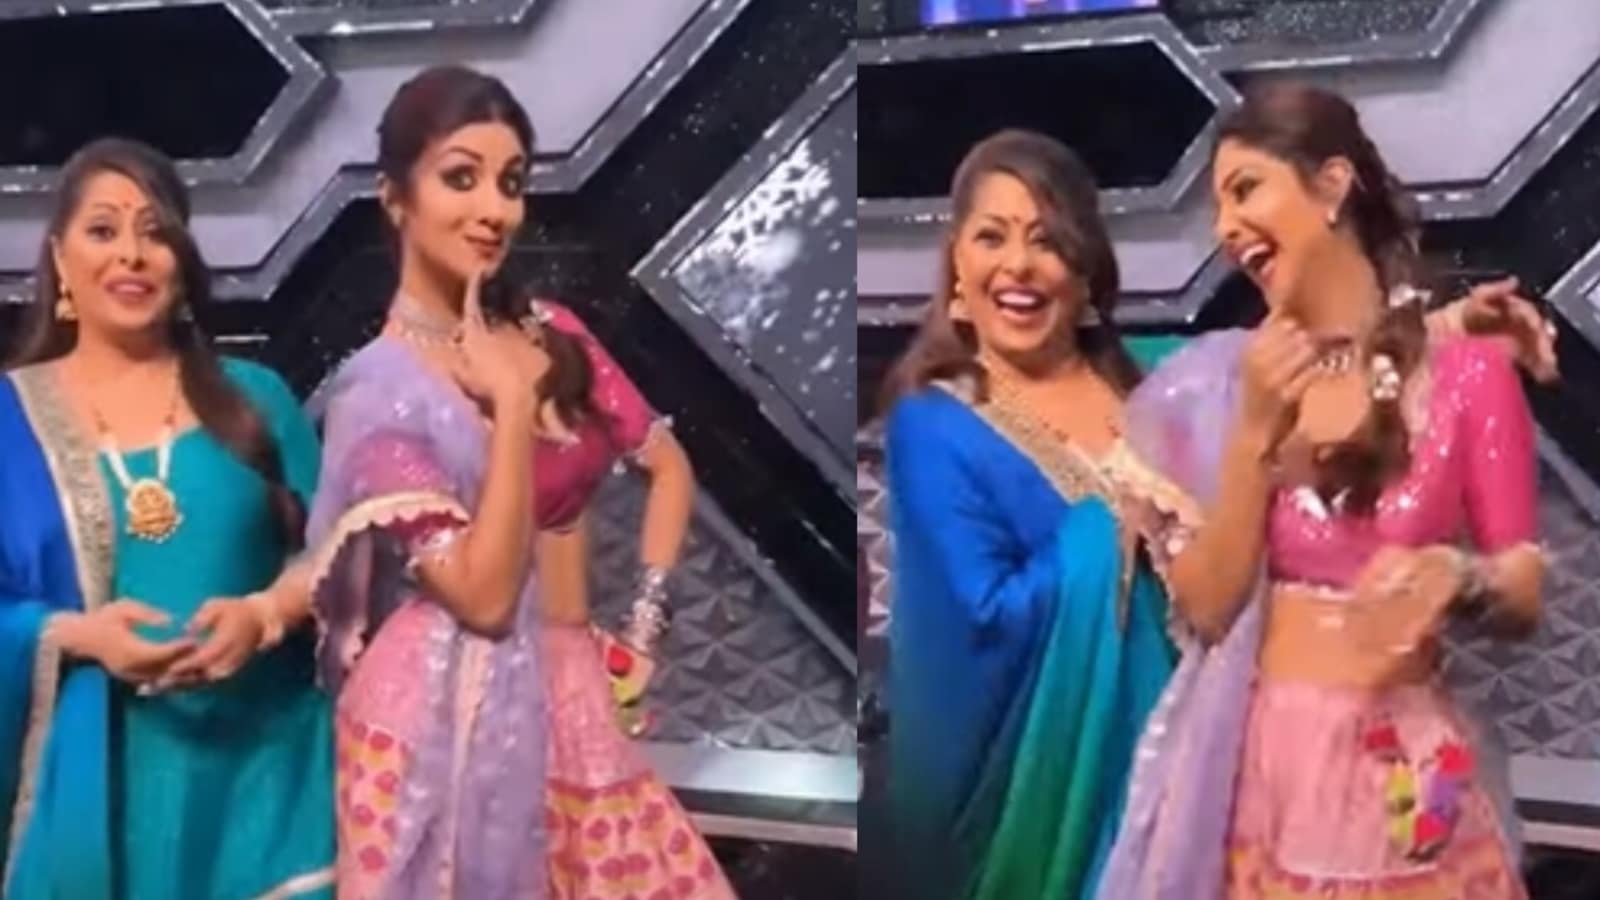 Kapur Xxx - Shilpa Shetty bursts into laughs as she dances to Manike Mage Hithe with  Geeta Kapur, watch | Bollywood - Hindustan Times